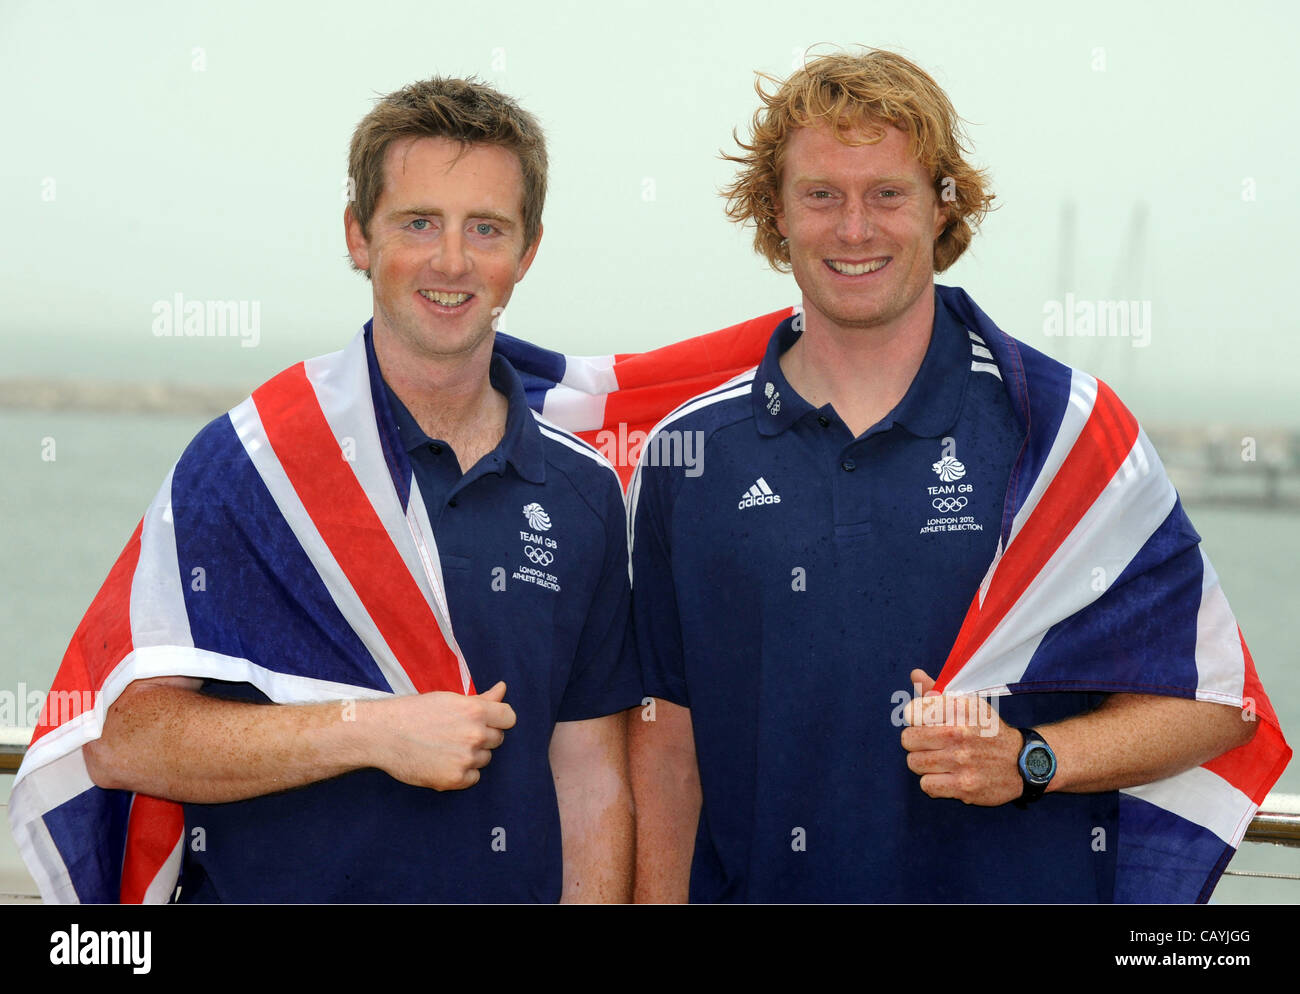 The last Olympic sailors selected for Team GB announced today at Portland, Dorset. Stevie Morrison and Ben Rhodes thrilled to be sailing in the 49ER Class. 12/05/2012 PICTURE BY: DORSET MEDIA SERVICE. Stock Photo